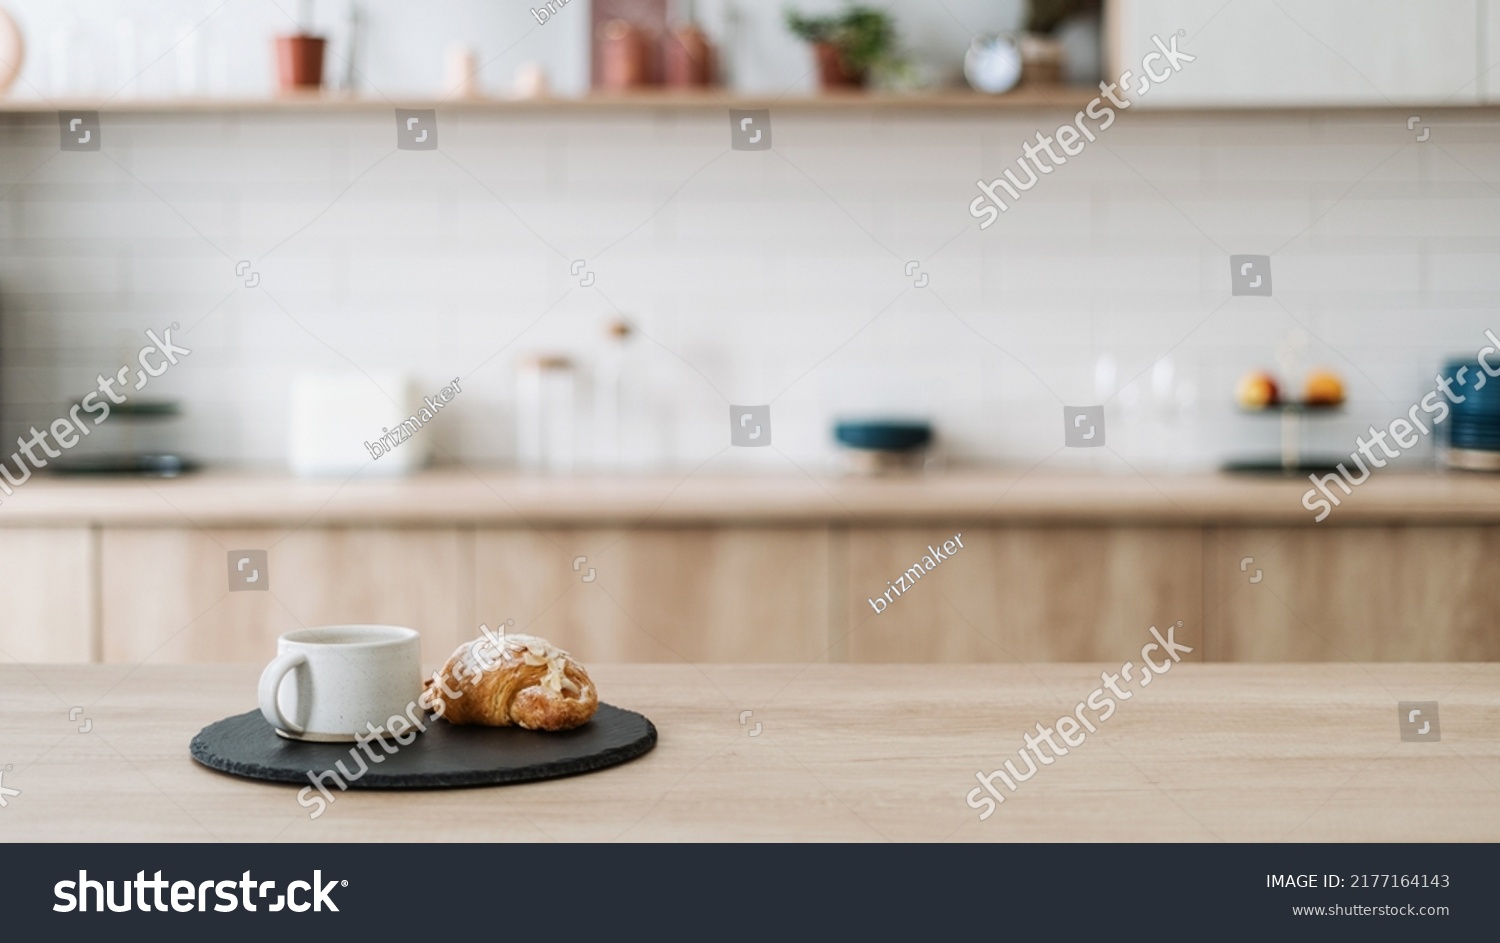 Croissant and coffee on kitchen countertop, against blurred minimalist interior with modern furniture. Selective focus at homemade pastry and tea drink in cup on wooden table, copy space, web banner #2177164143